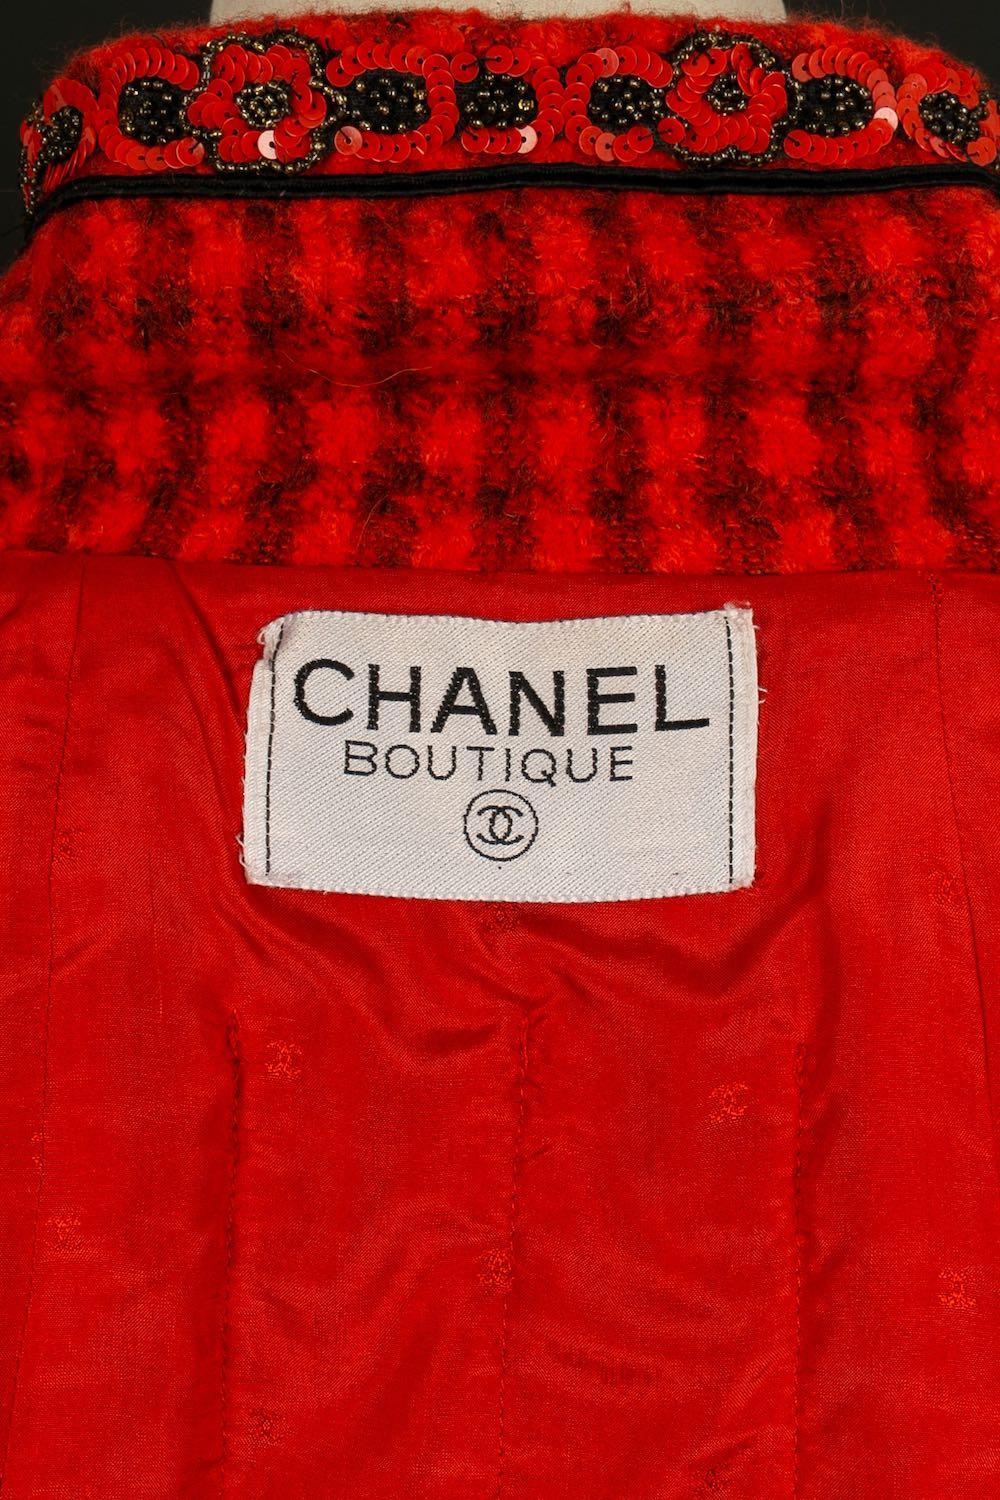 Chanel Red and Black Skirt Suit Autumn-Winter, 1990/91 For Sale 12